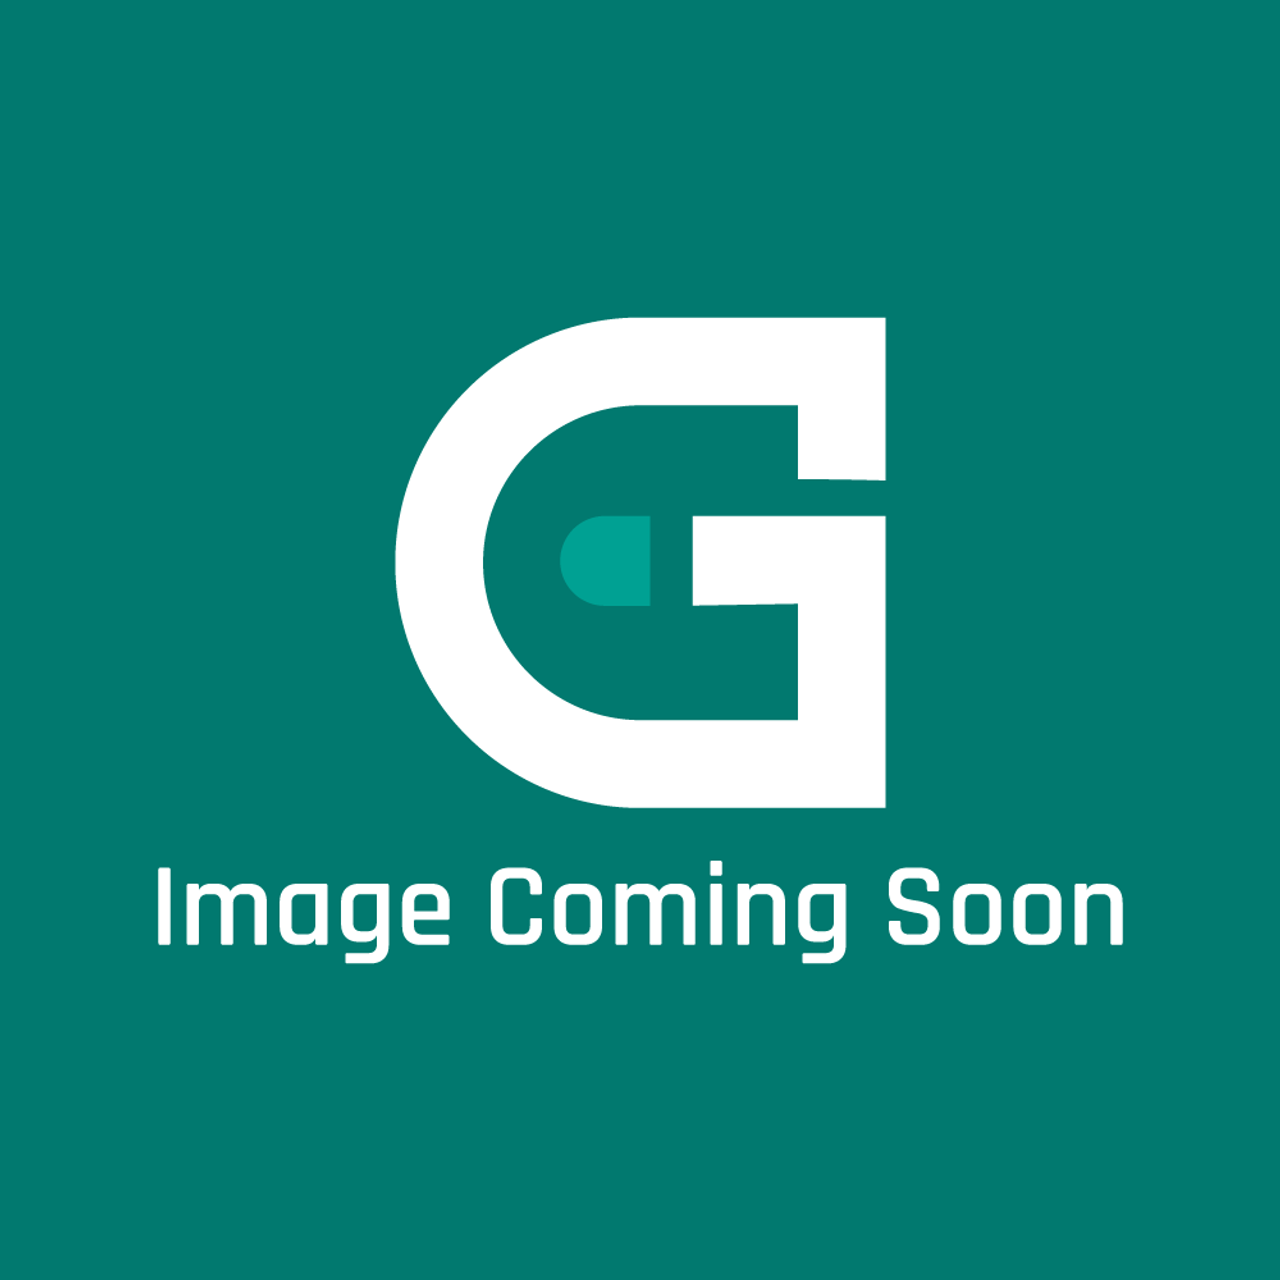 Cres Cor 0861264 - Gasket, Magnetic , 21.25" X 43.125" - Image Coming Soon!